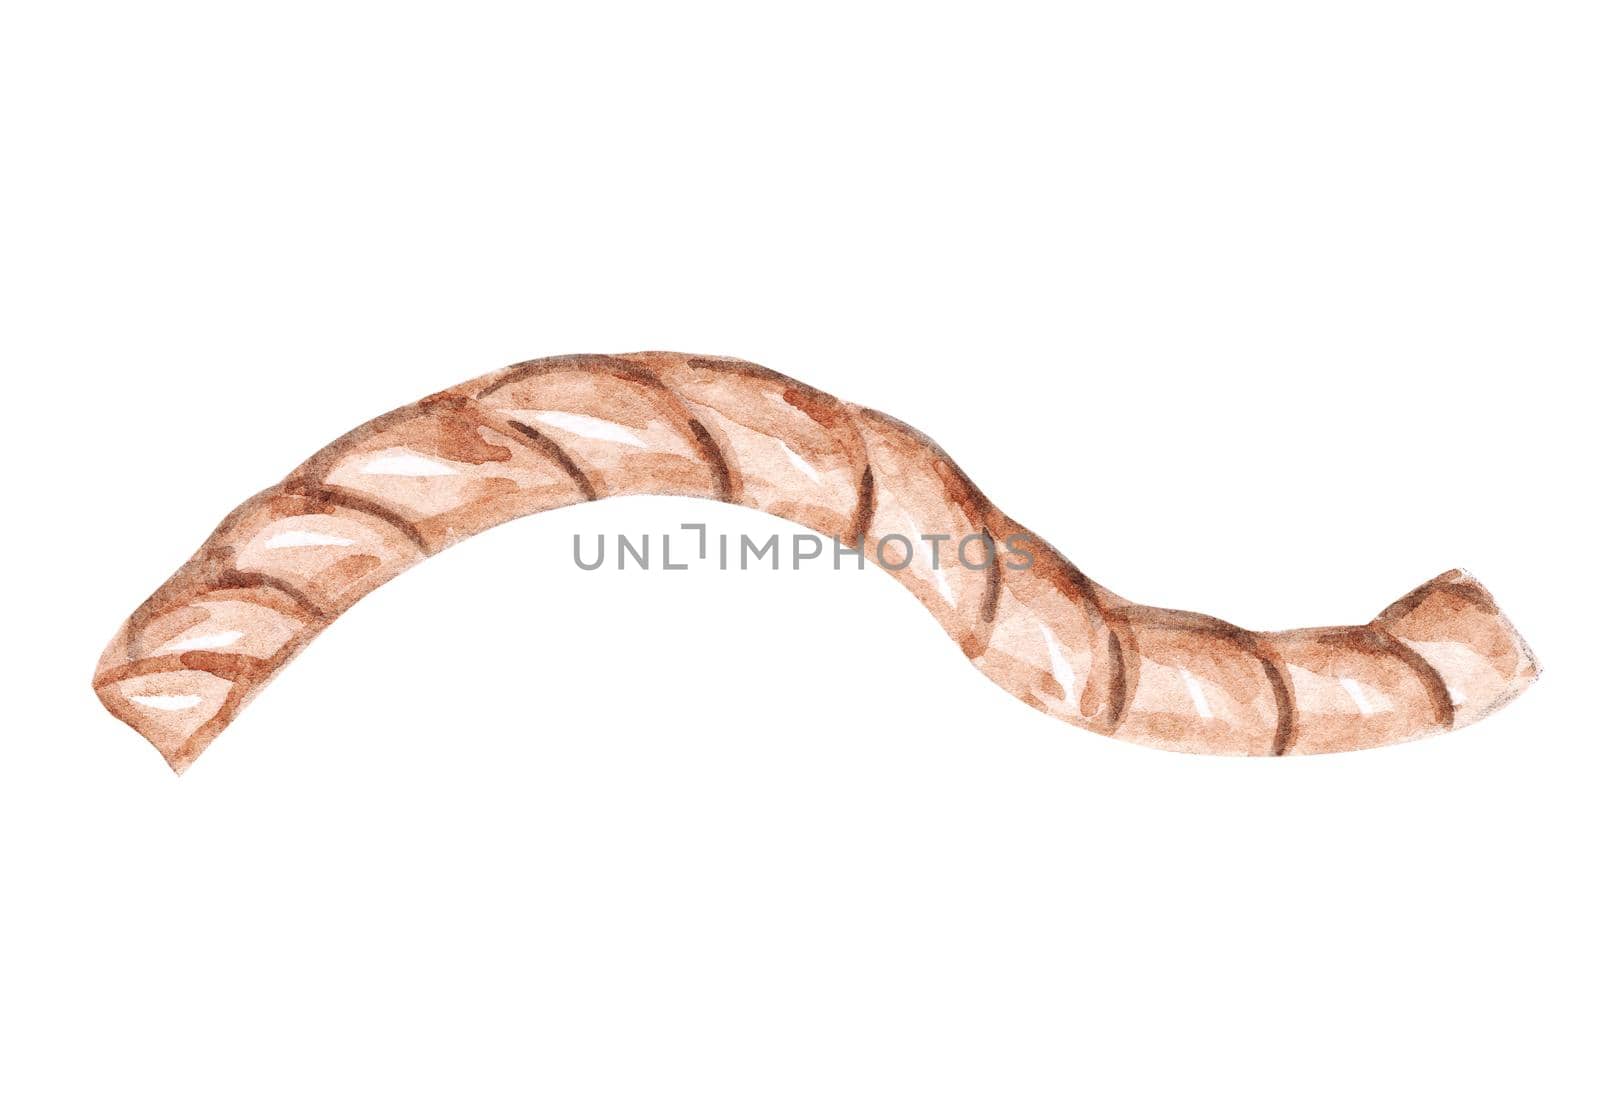 Watercolor brown rope isolated on white background. Hand drawn stitch illustration. Sewing tool